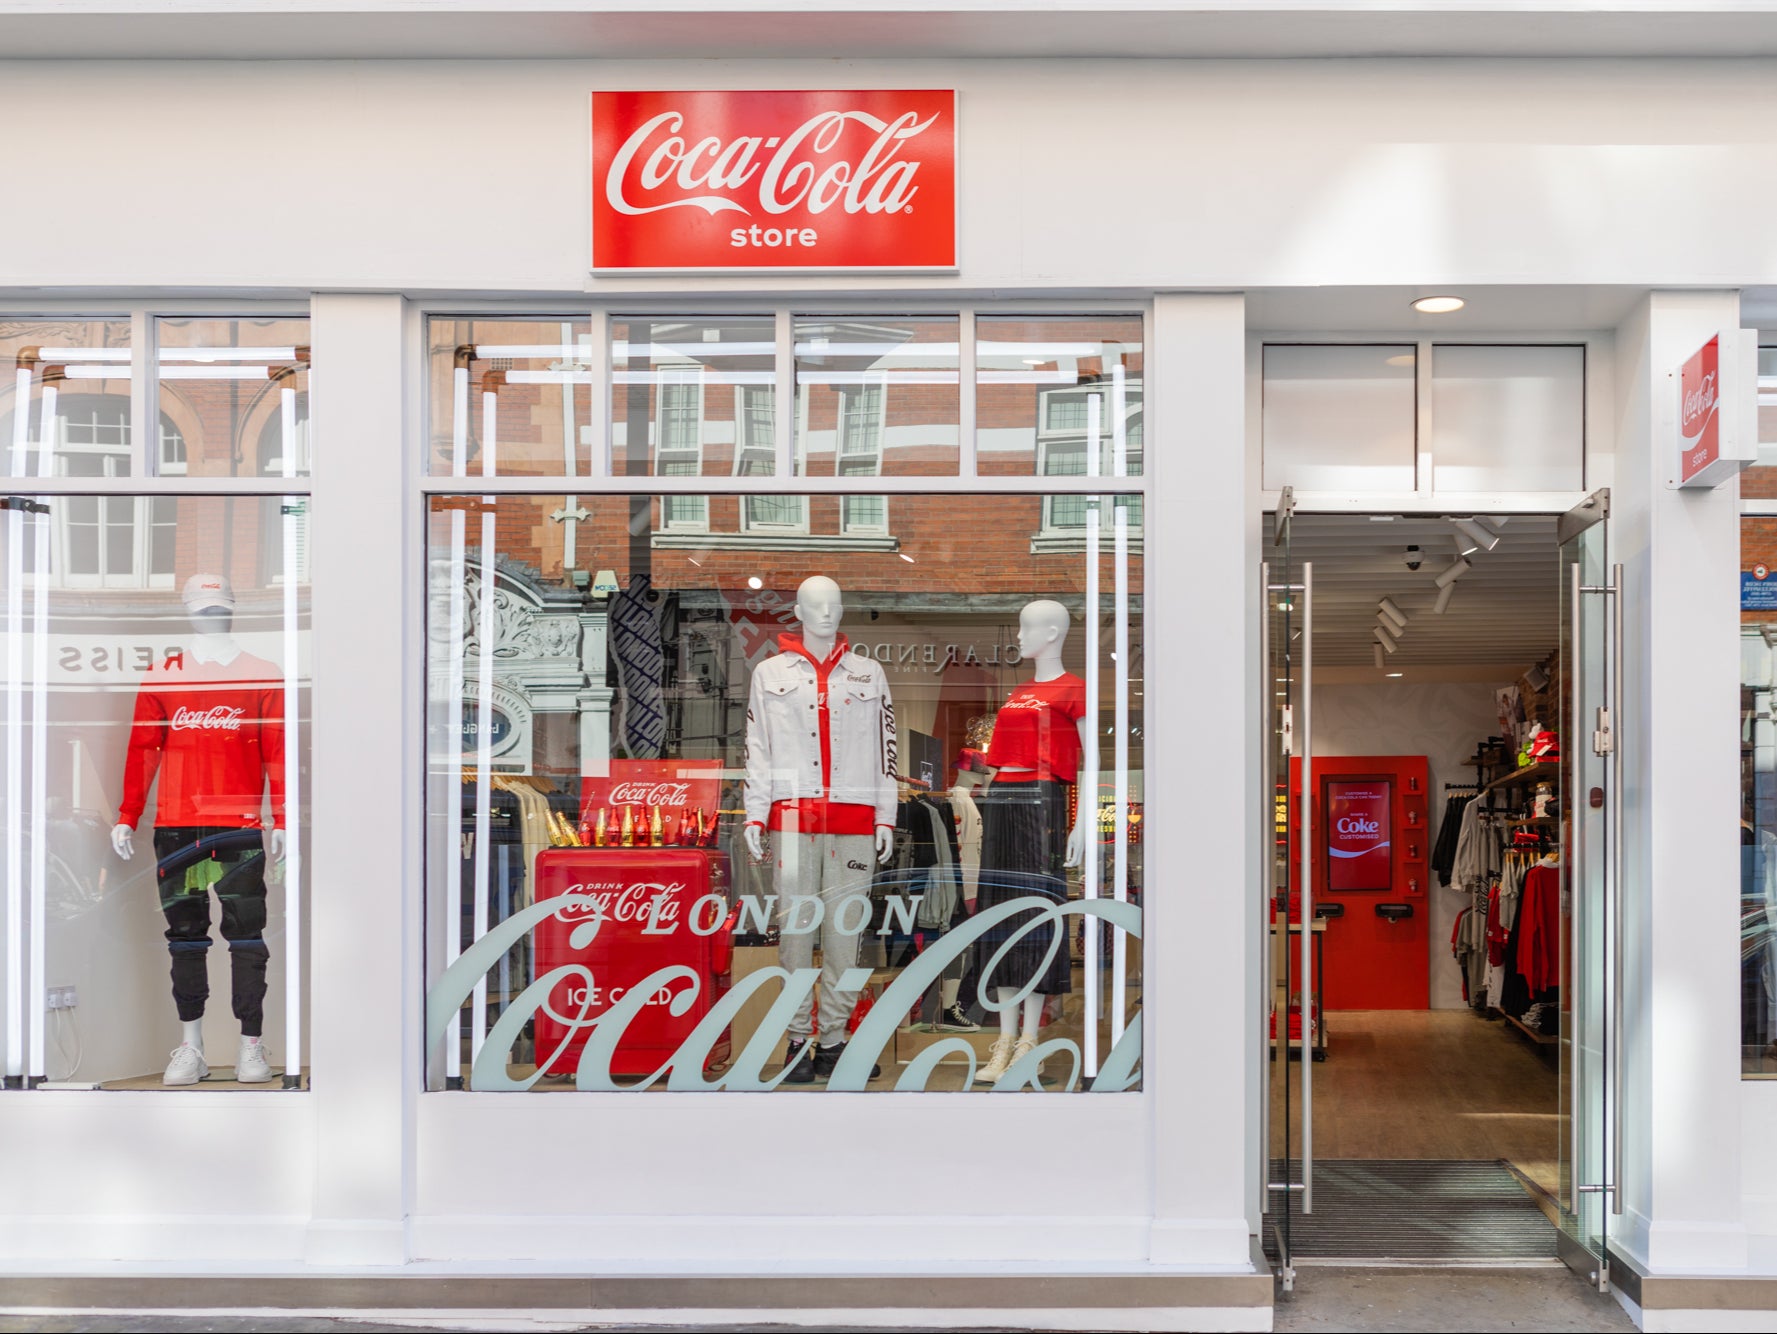 Coca-Cola has opened a new fashion store in London, its first in Europe